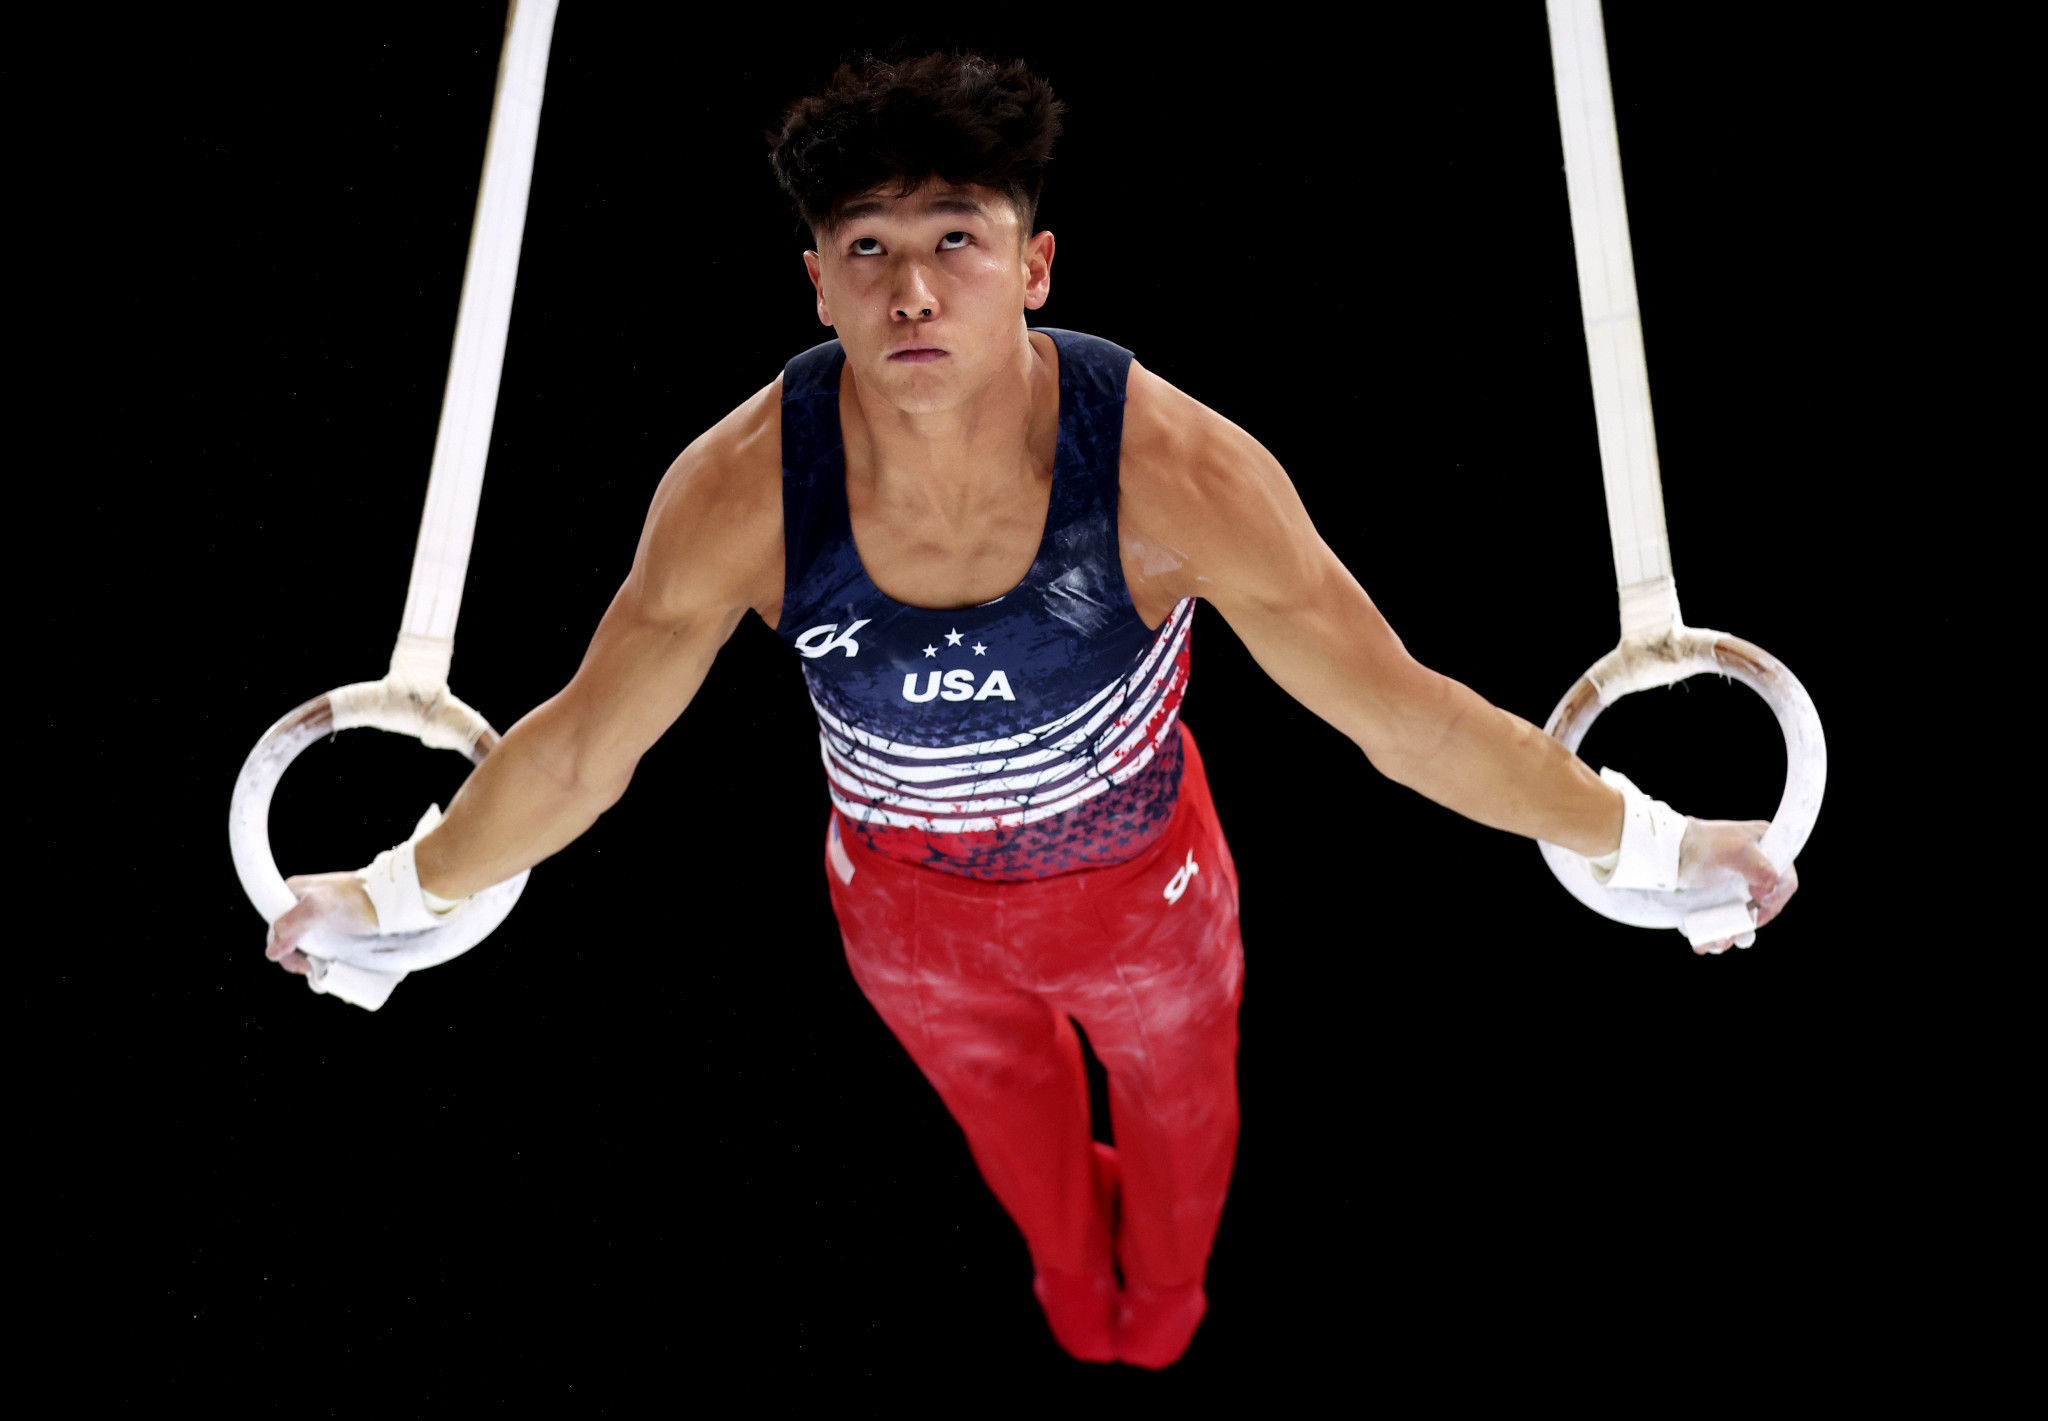 Yul Moldauer was part of the United States line-up that claimed a first team medal at an Olympics or World Championships since 2014 ©Getty Images